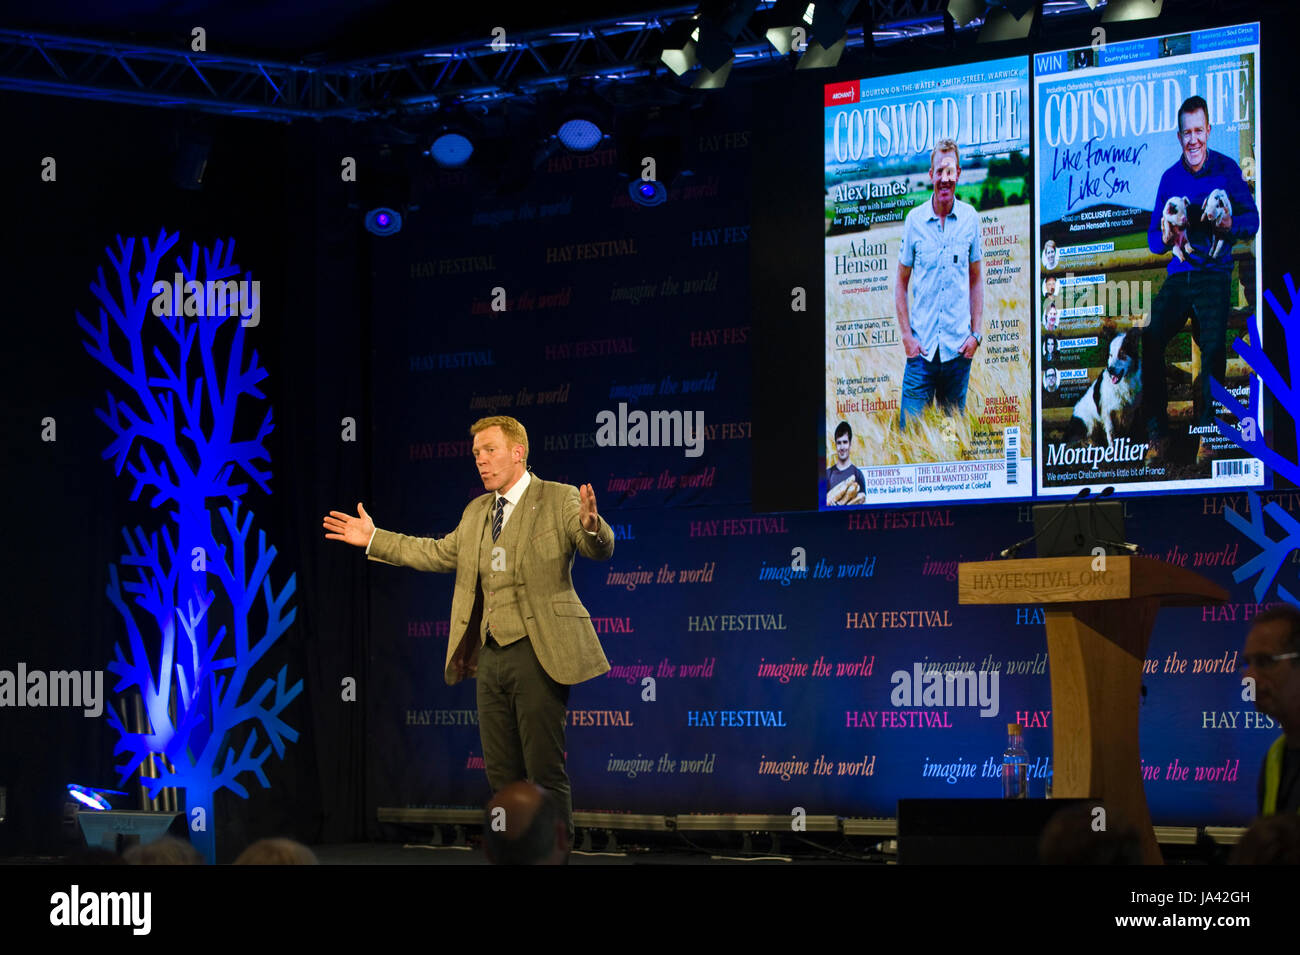 Adam Henson farmer & Countryfile presenter speaking about his life & career on stage at Hay Festival 2017 Hay-on-Wye Powys Wales UK Stock Photo